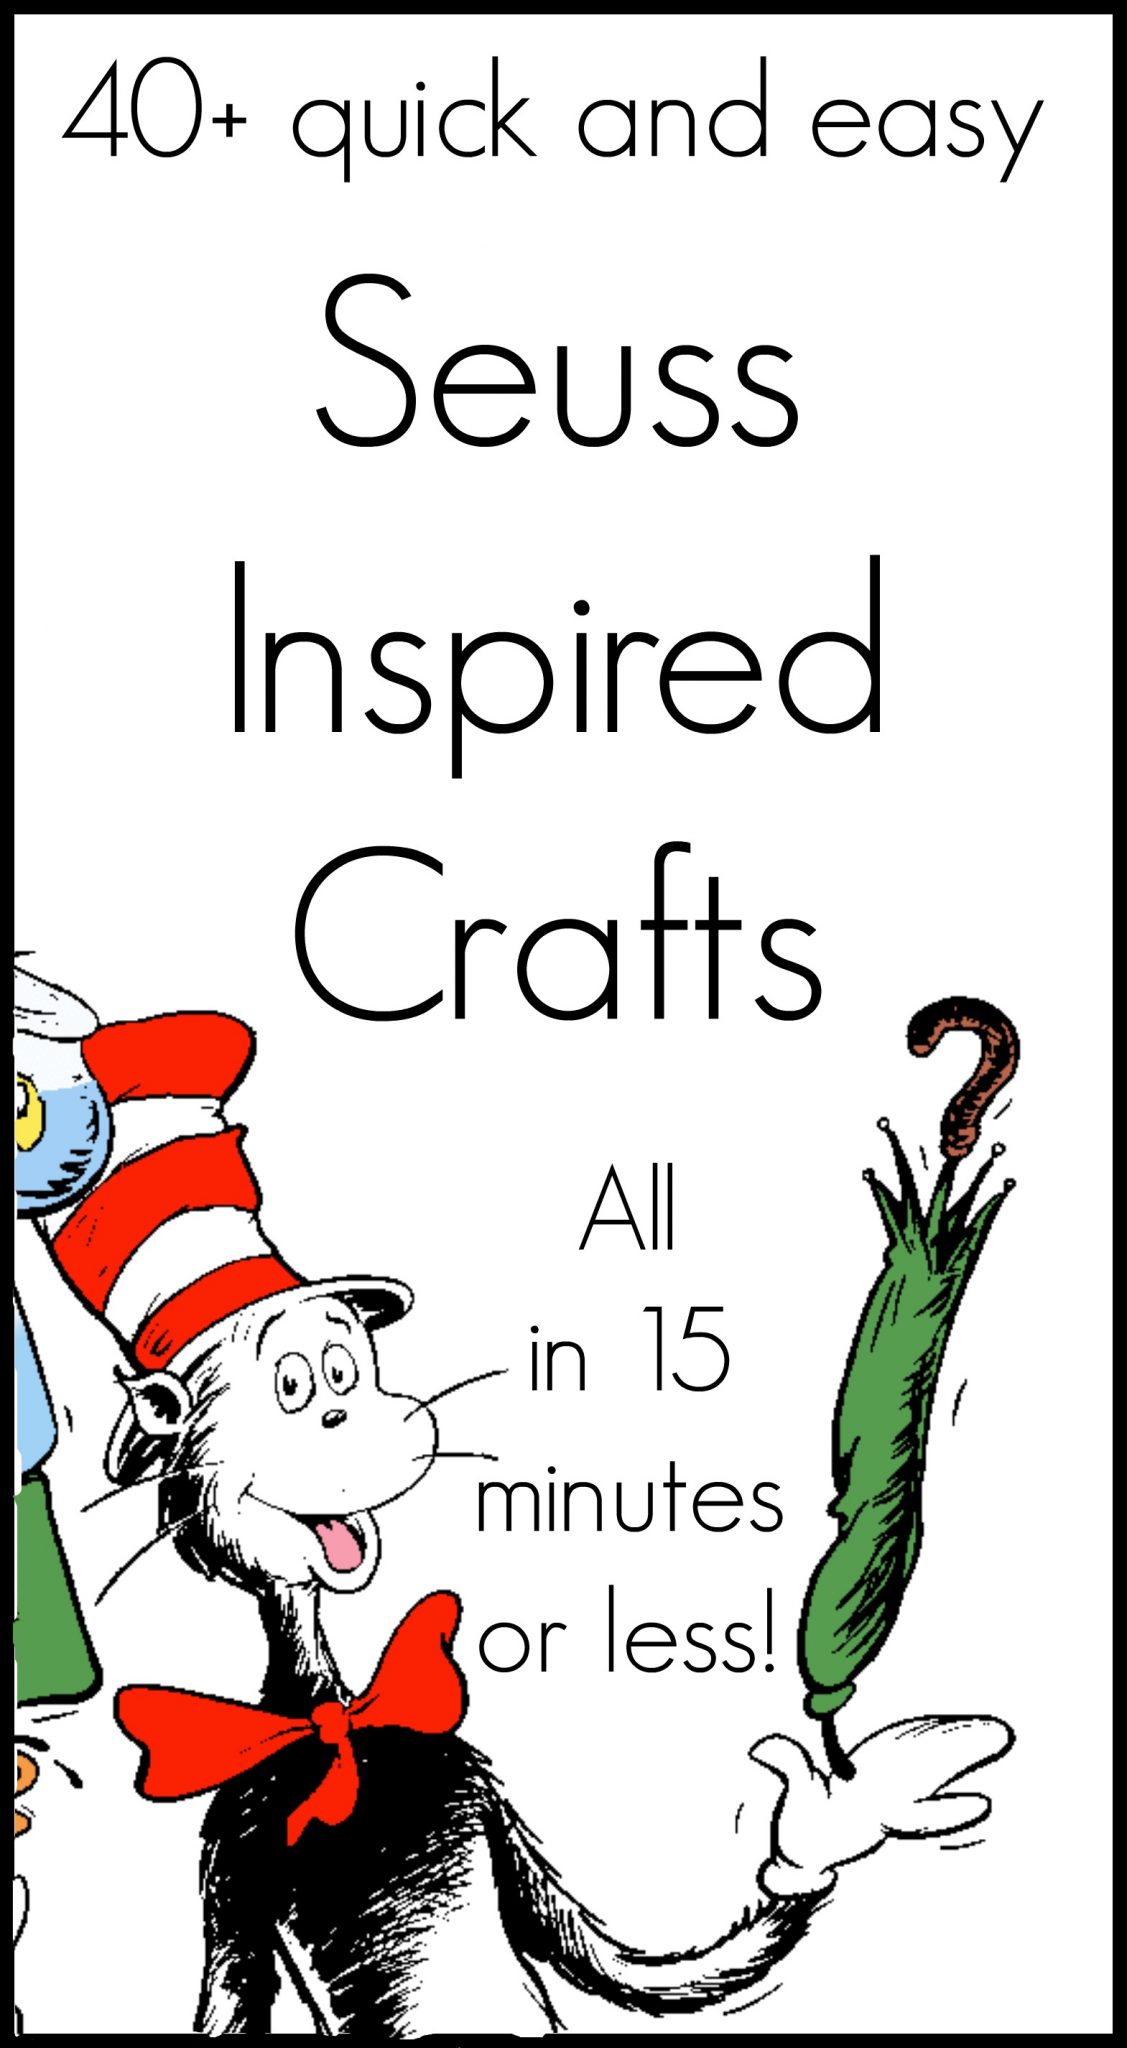 A collection of over 40 Seuss crafts that all take 15 minutes or less to make